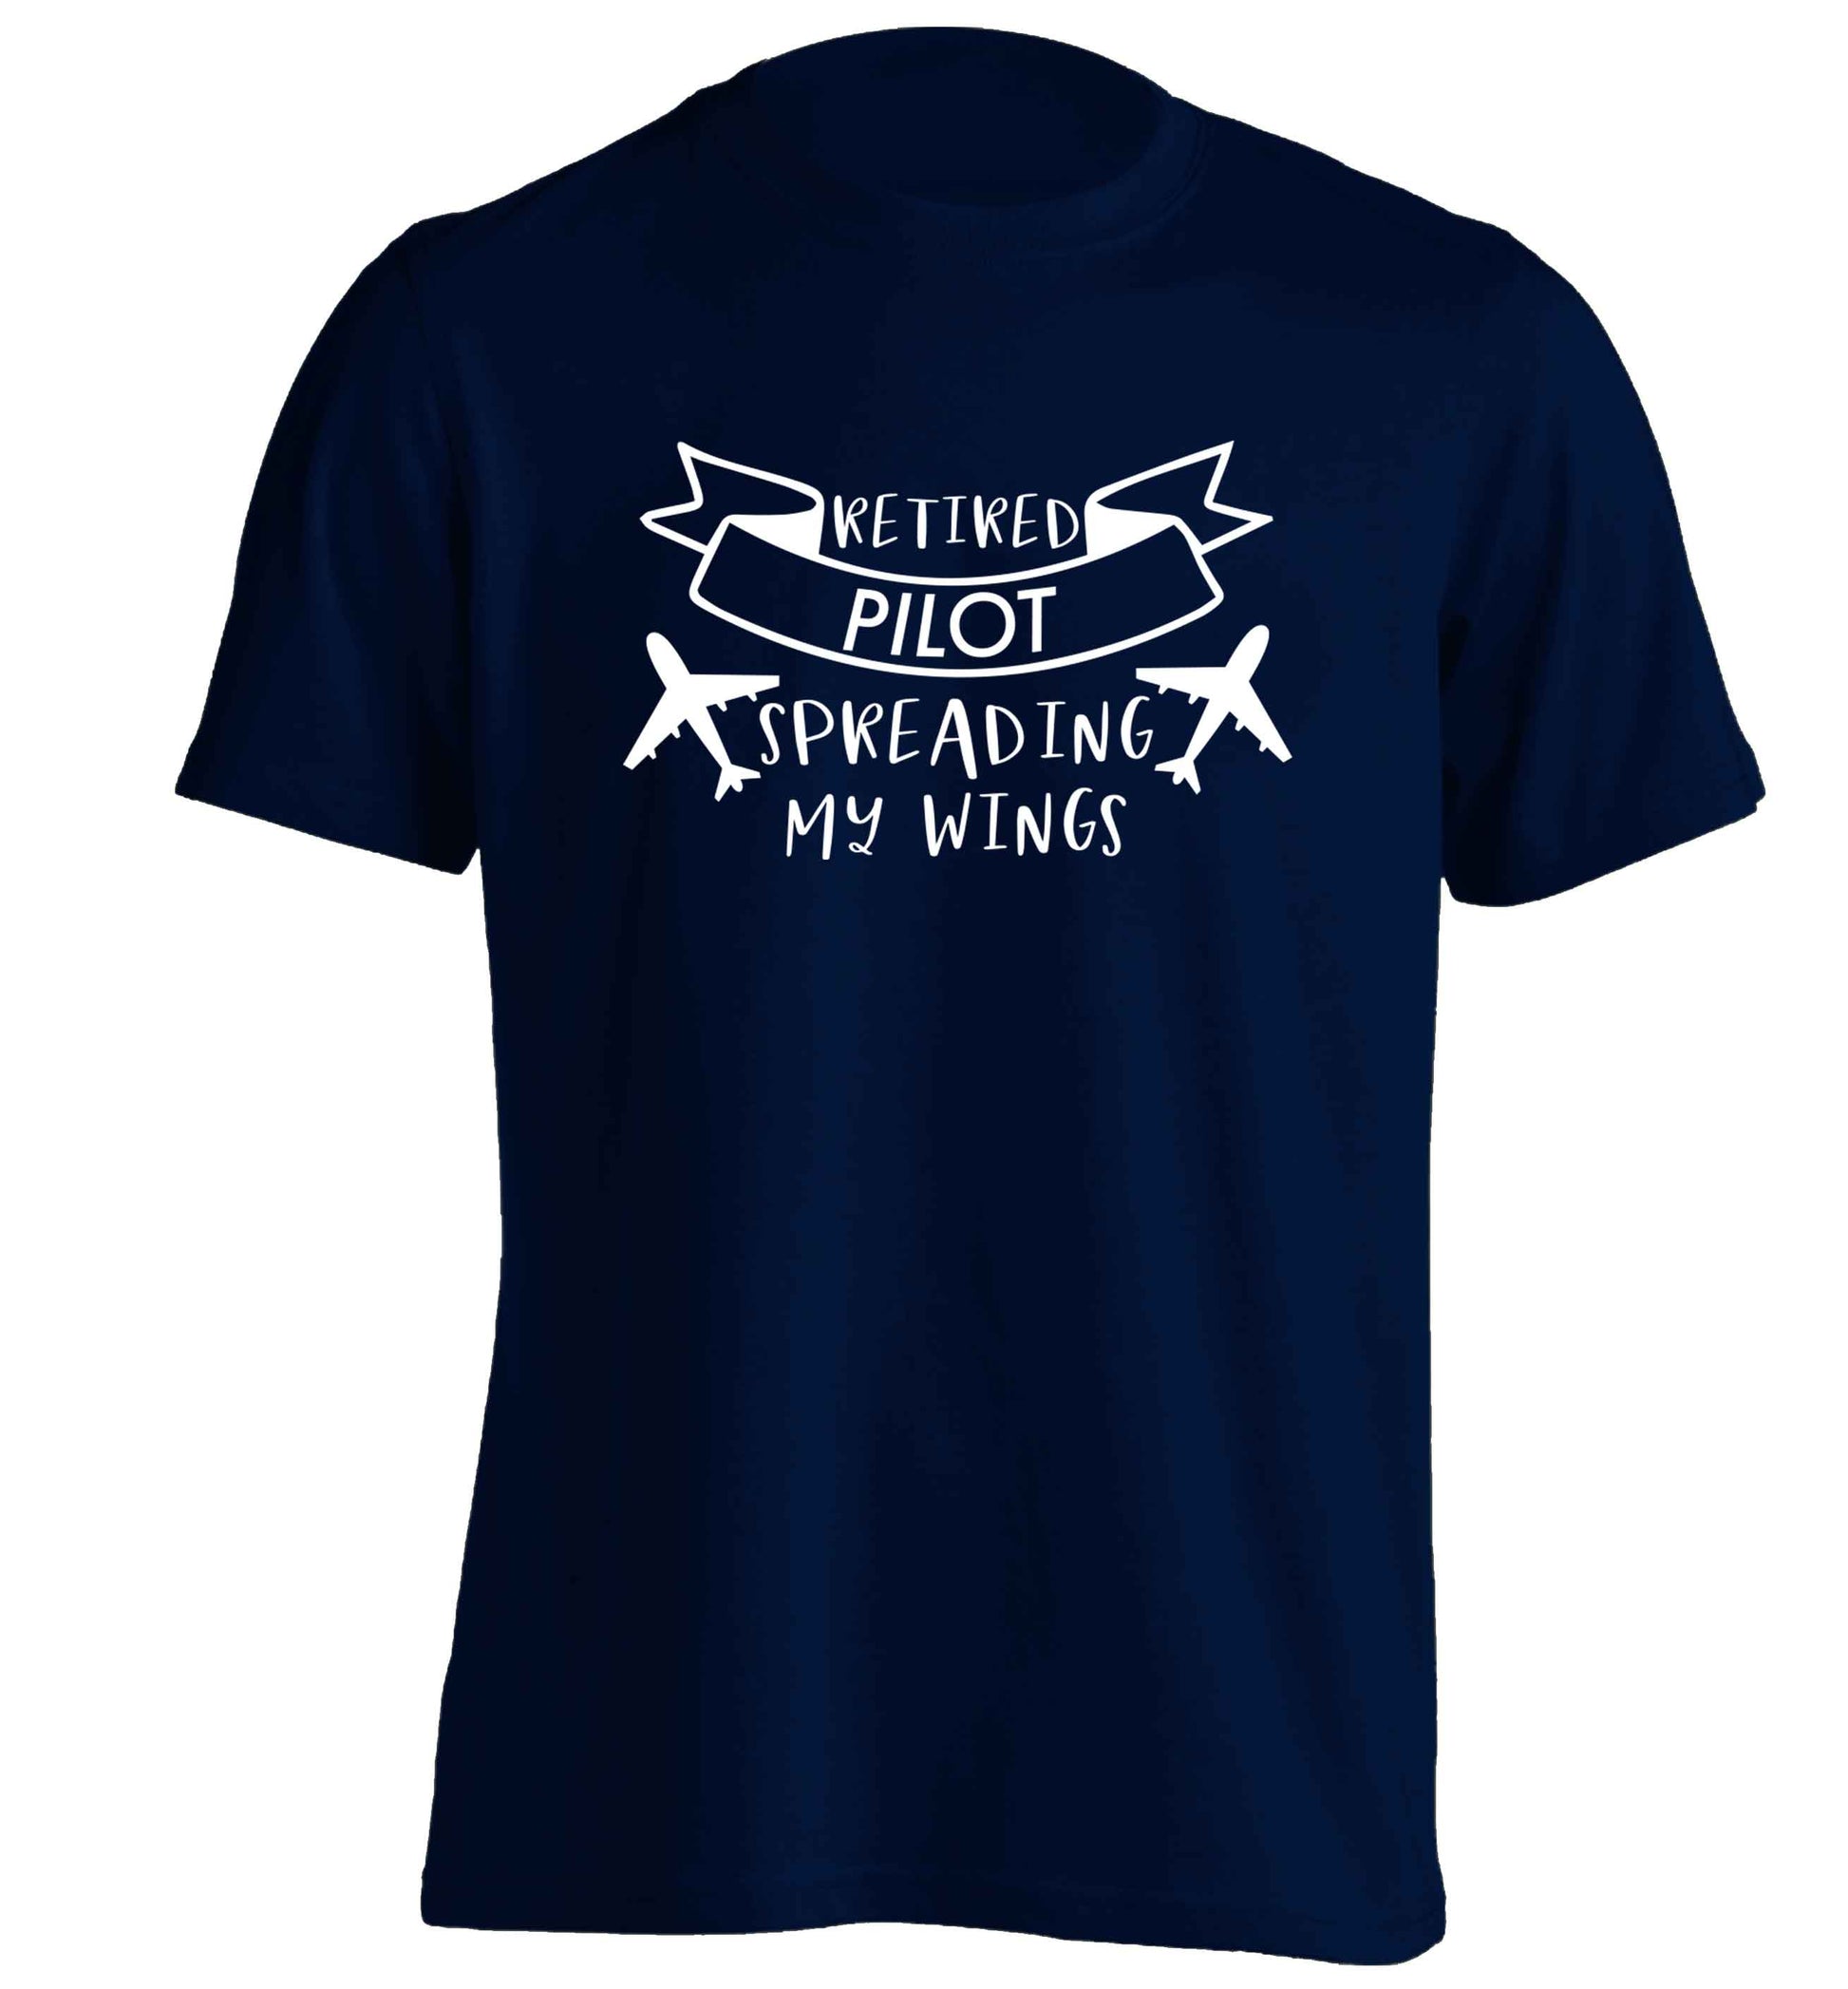 Retired pilot spreading my wings adults unisex navy Tshirt 2XL